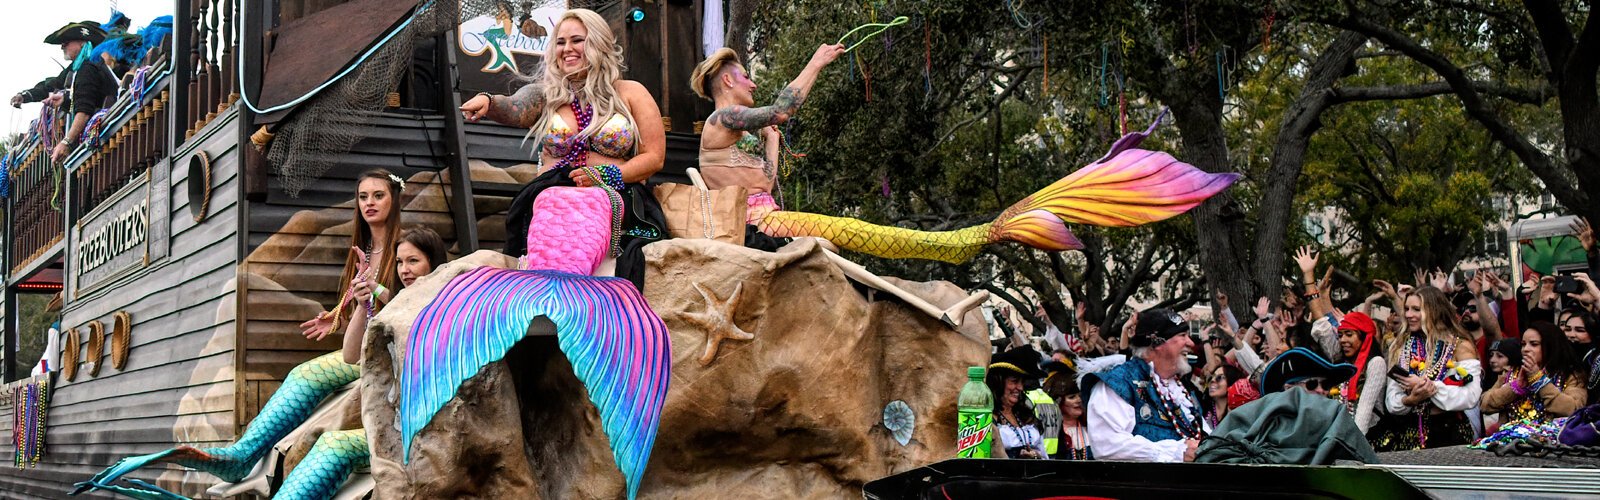 The beautiful mermaids of the Freebooters float make a splash down Bayshore Boulevard with their colorful fishtails.